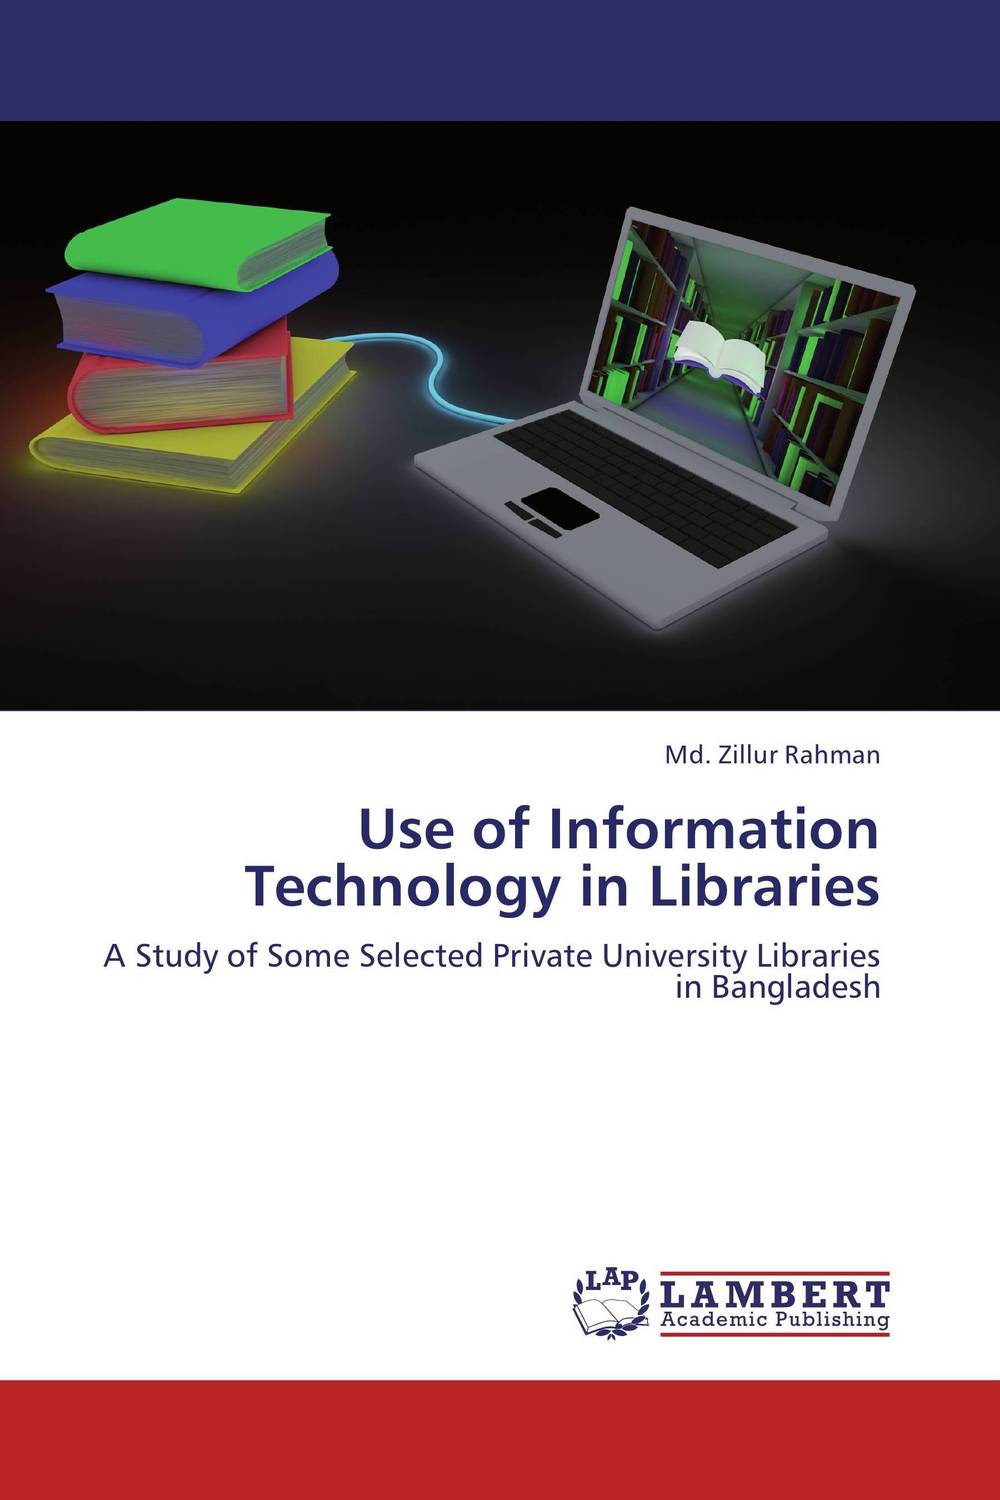 Use of Information Technology in Libraries